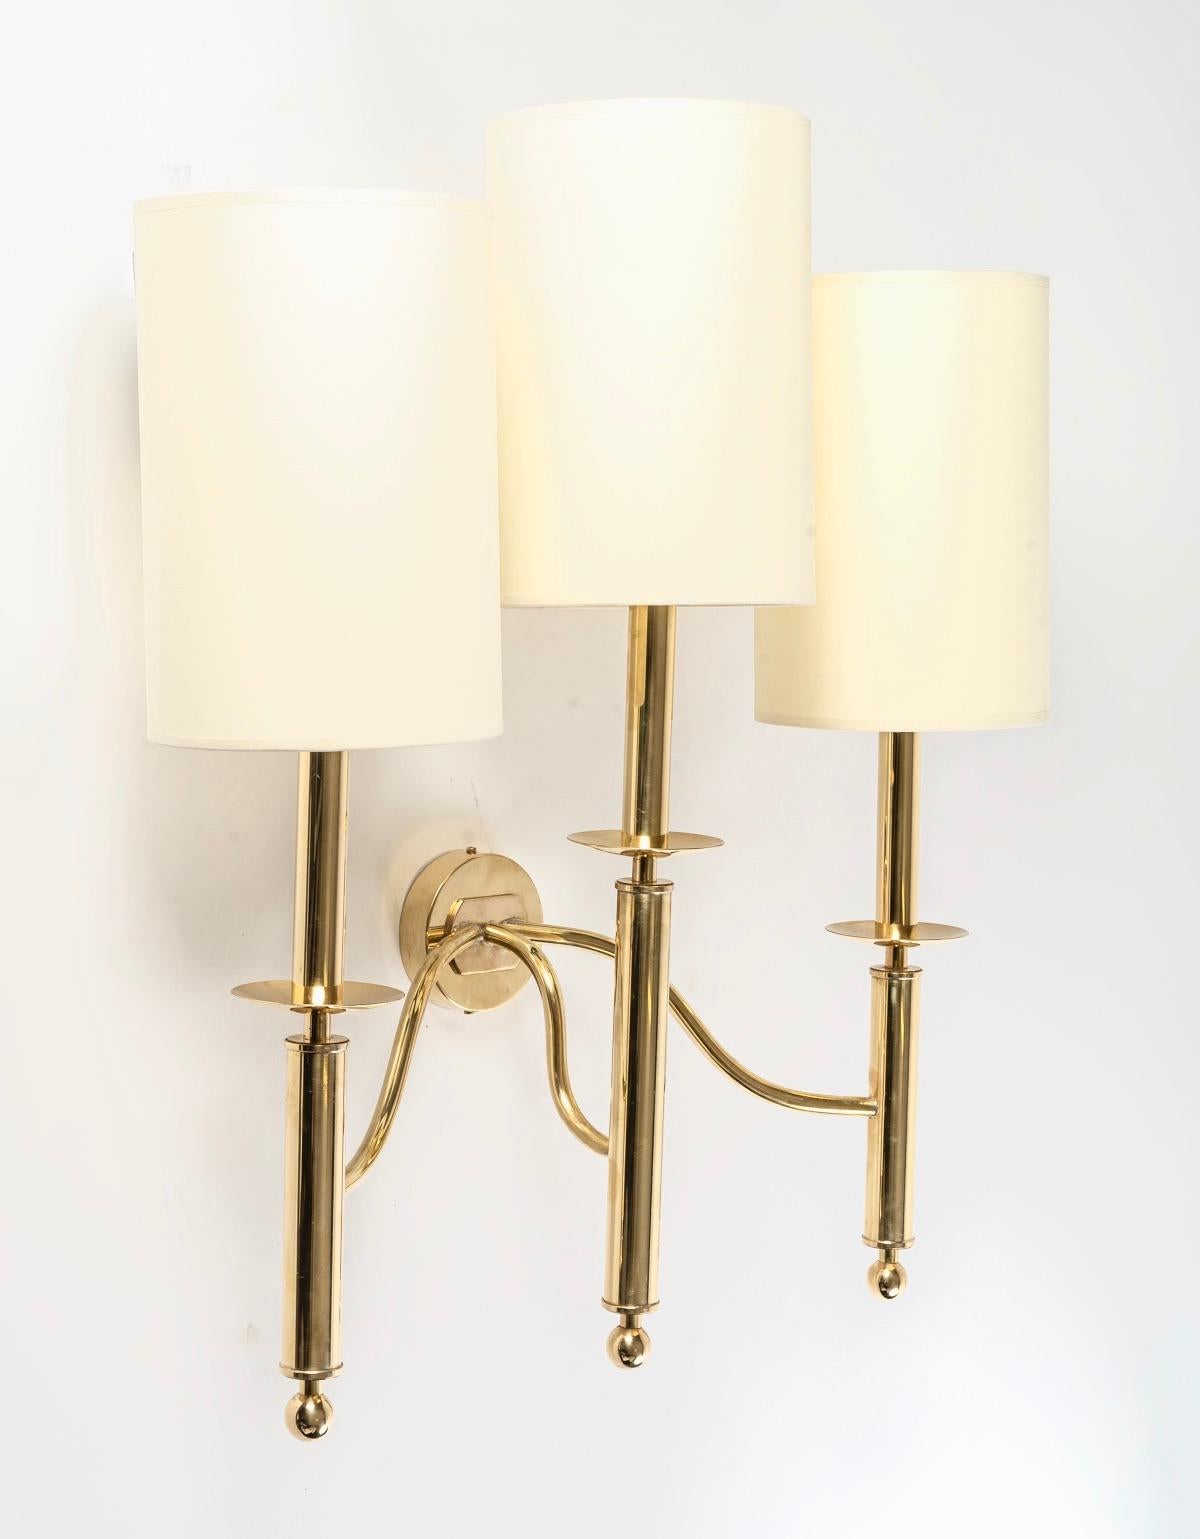 Elegant pair of wall lights, made up of 3 arms formed by 3 long tubes of round section underlined by small cups placed high on the upper part and dressed in cylindrical-shaped shade in ecru cotton made to measure.
On the lower part of the small